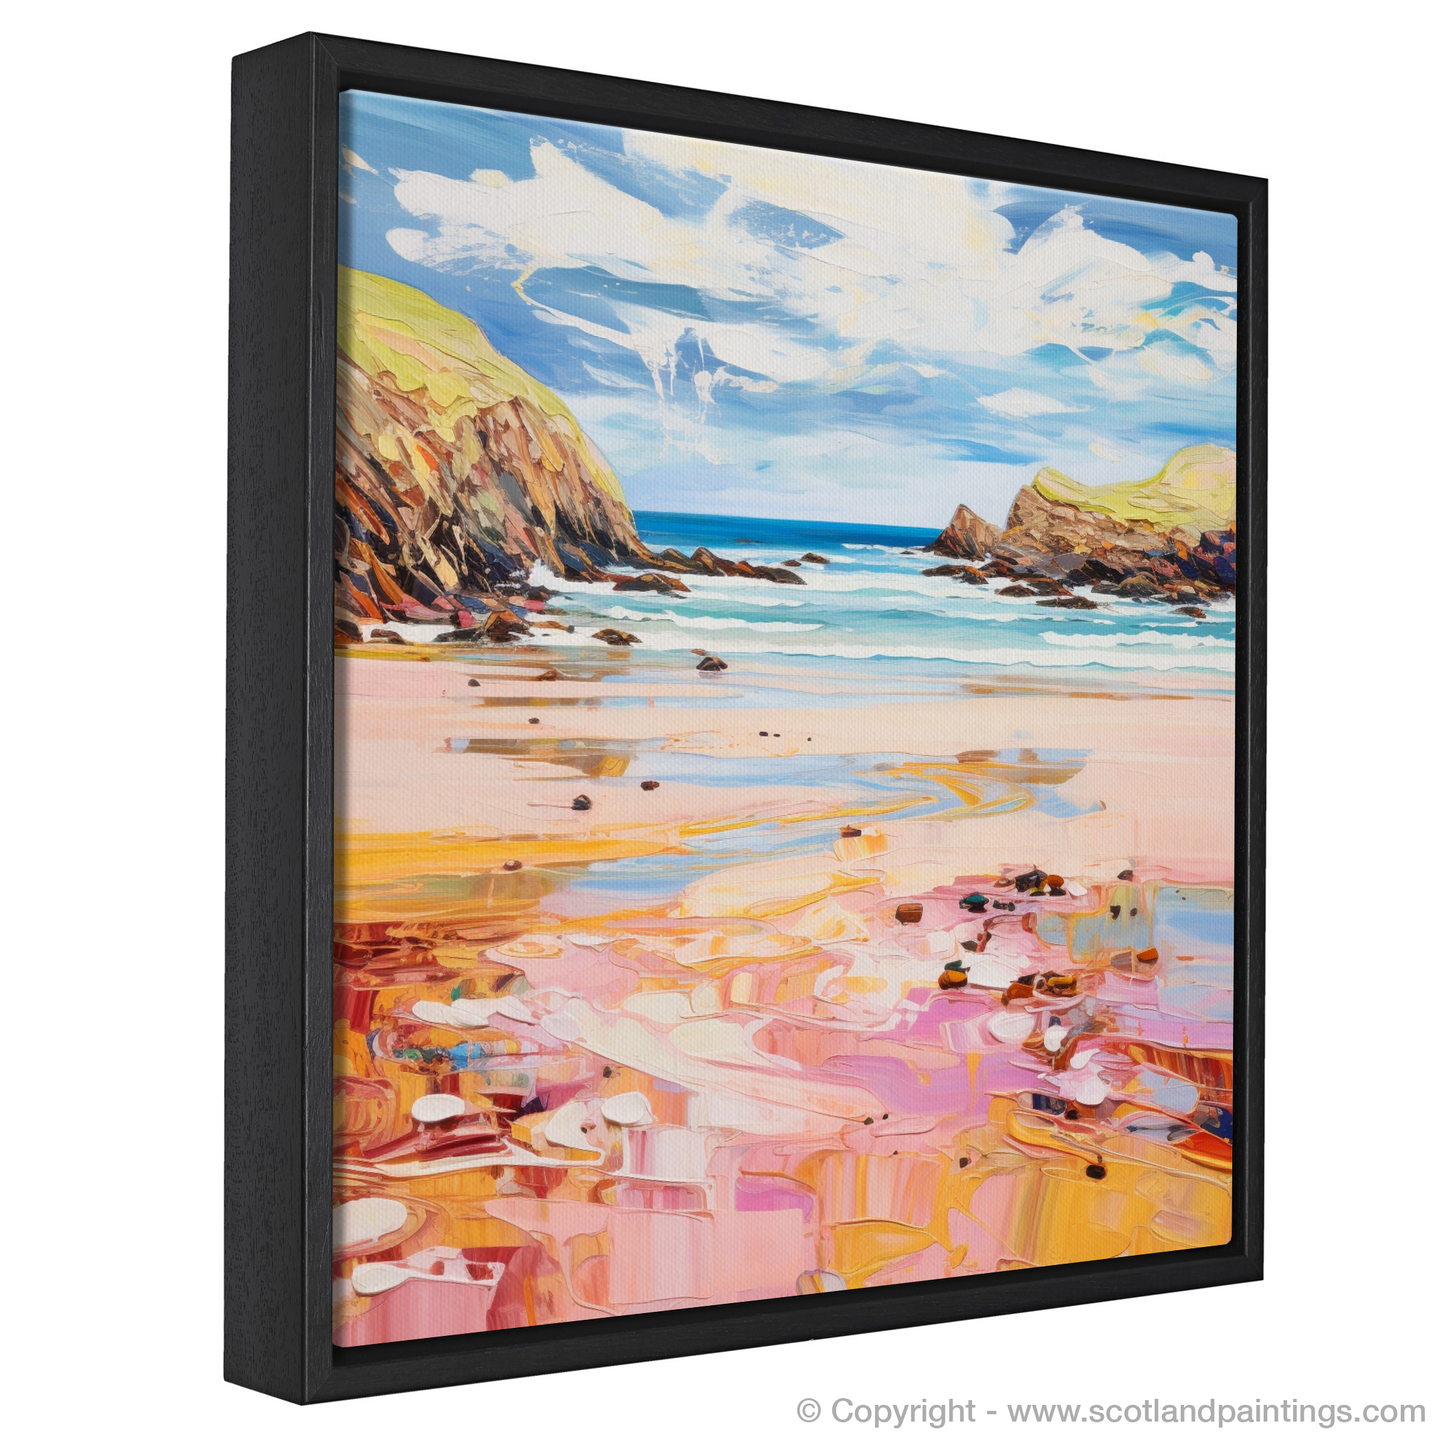 Painting and Art Print of Durness Beach, Sutherland in summer entitled "Summer Bliss at Durness Beach".